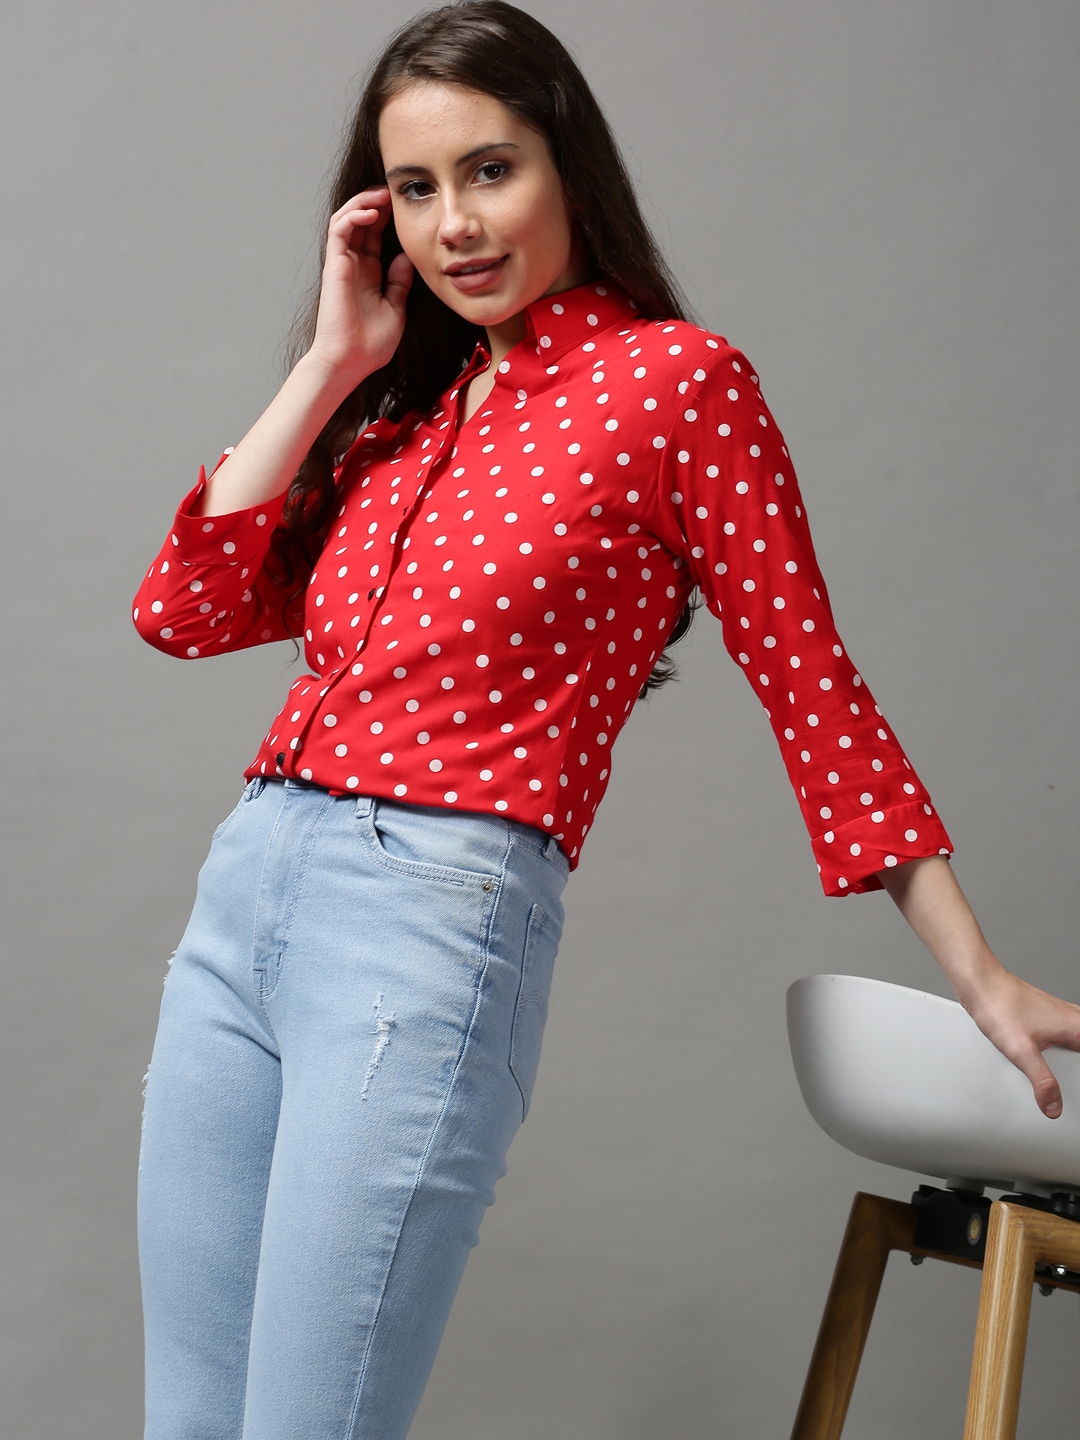 Women's Red Cotton Printed Casual Shirts